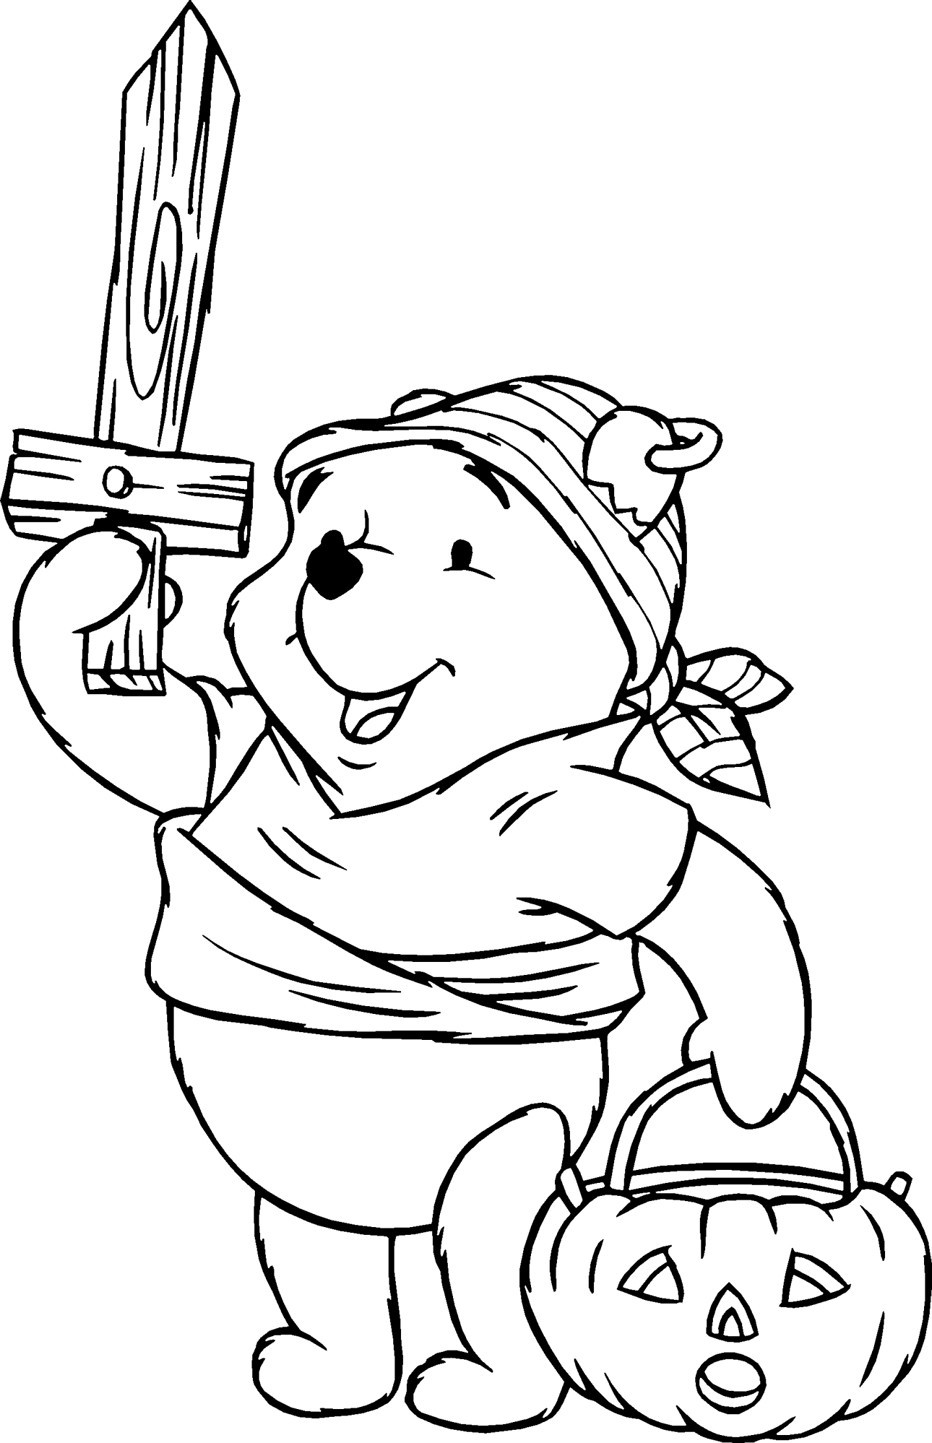 Online Coloring Book For Kids
 24 Free Printable Halloween Coloring Pages for Kids